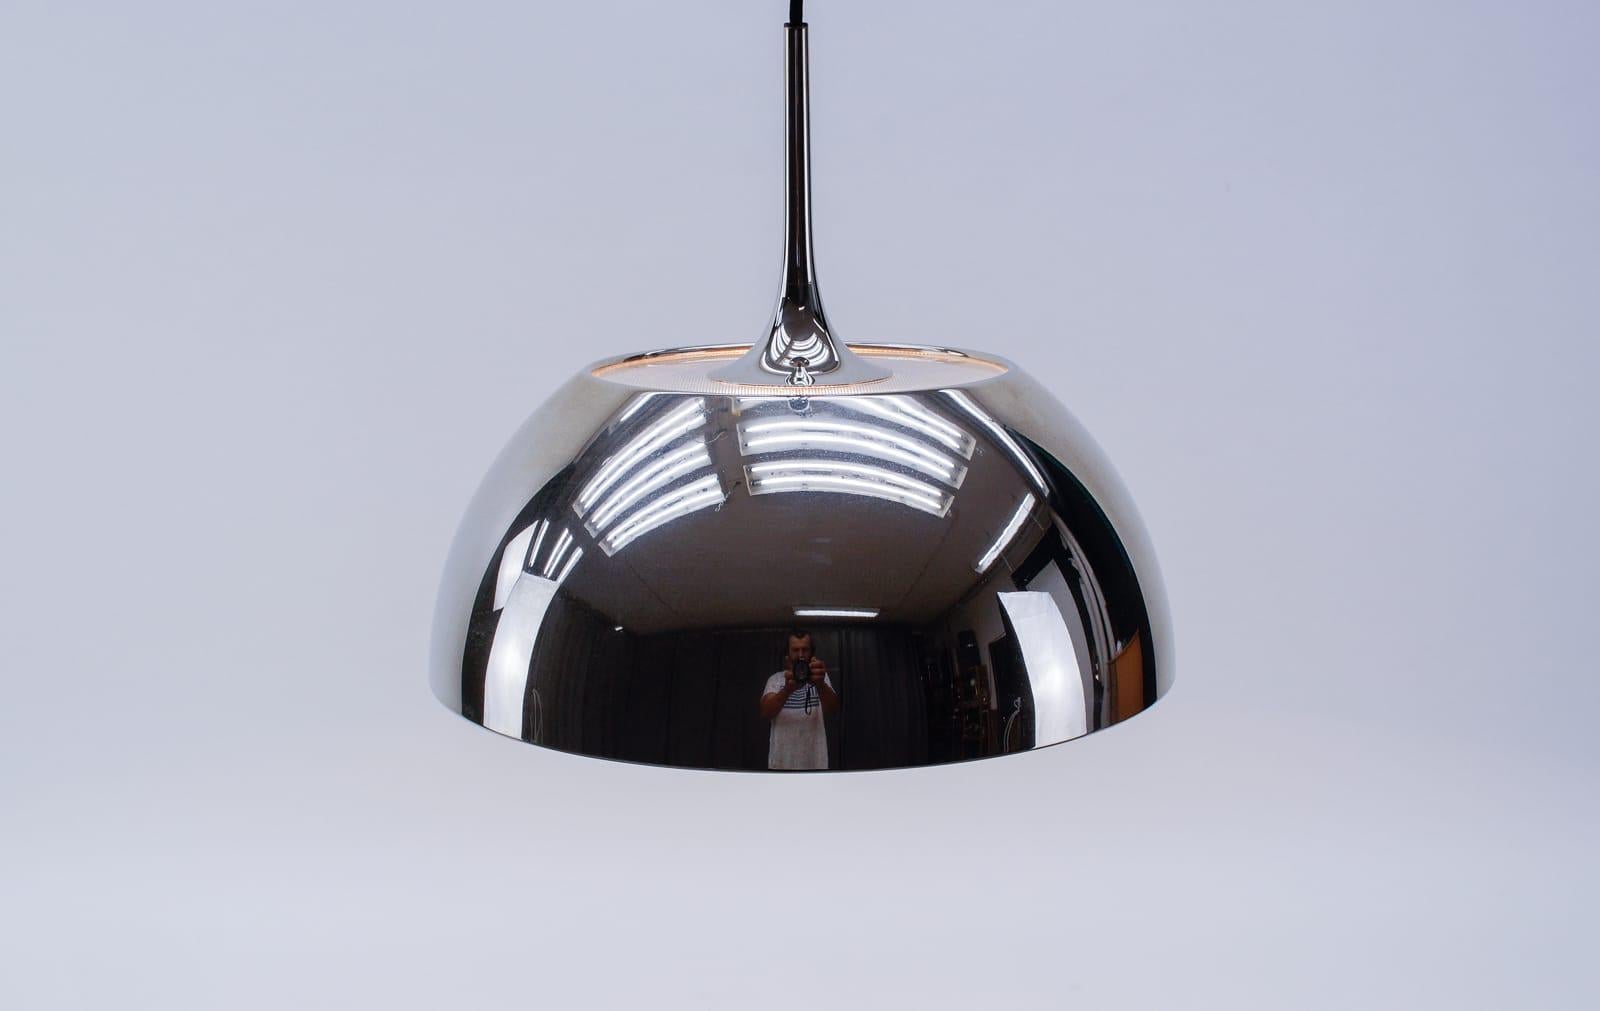 Florian Schulz Nickel Plated Pendant Lamp with Counterweight, Germany, 1970s For Sale 1